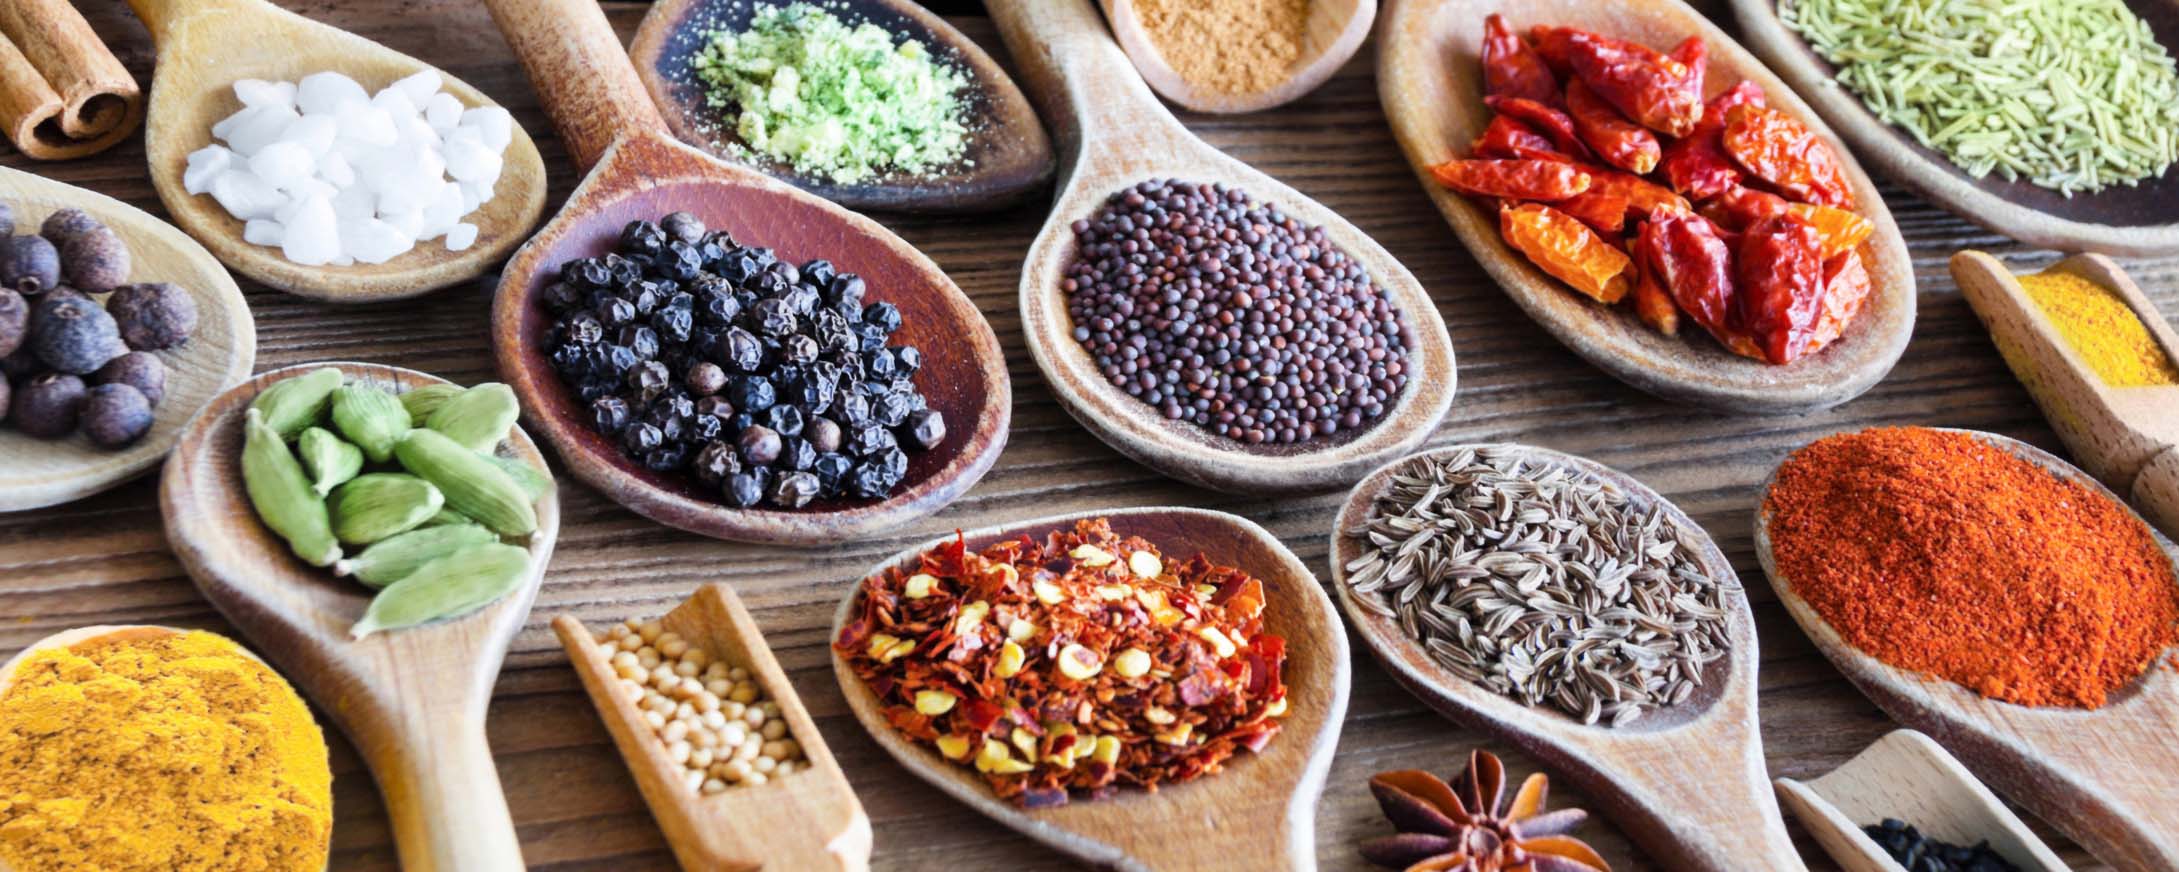 Variety of colorful, dried herbs and spices on wooden spoons. Gourmet Spice Company, Wholesale Food Distributor.